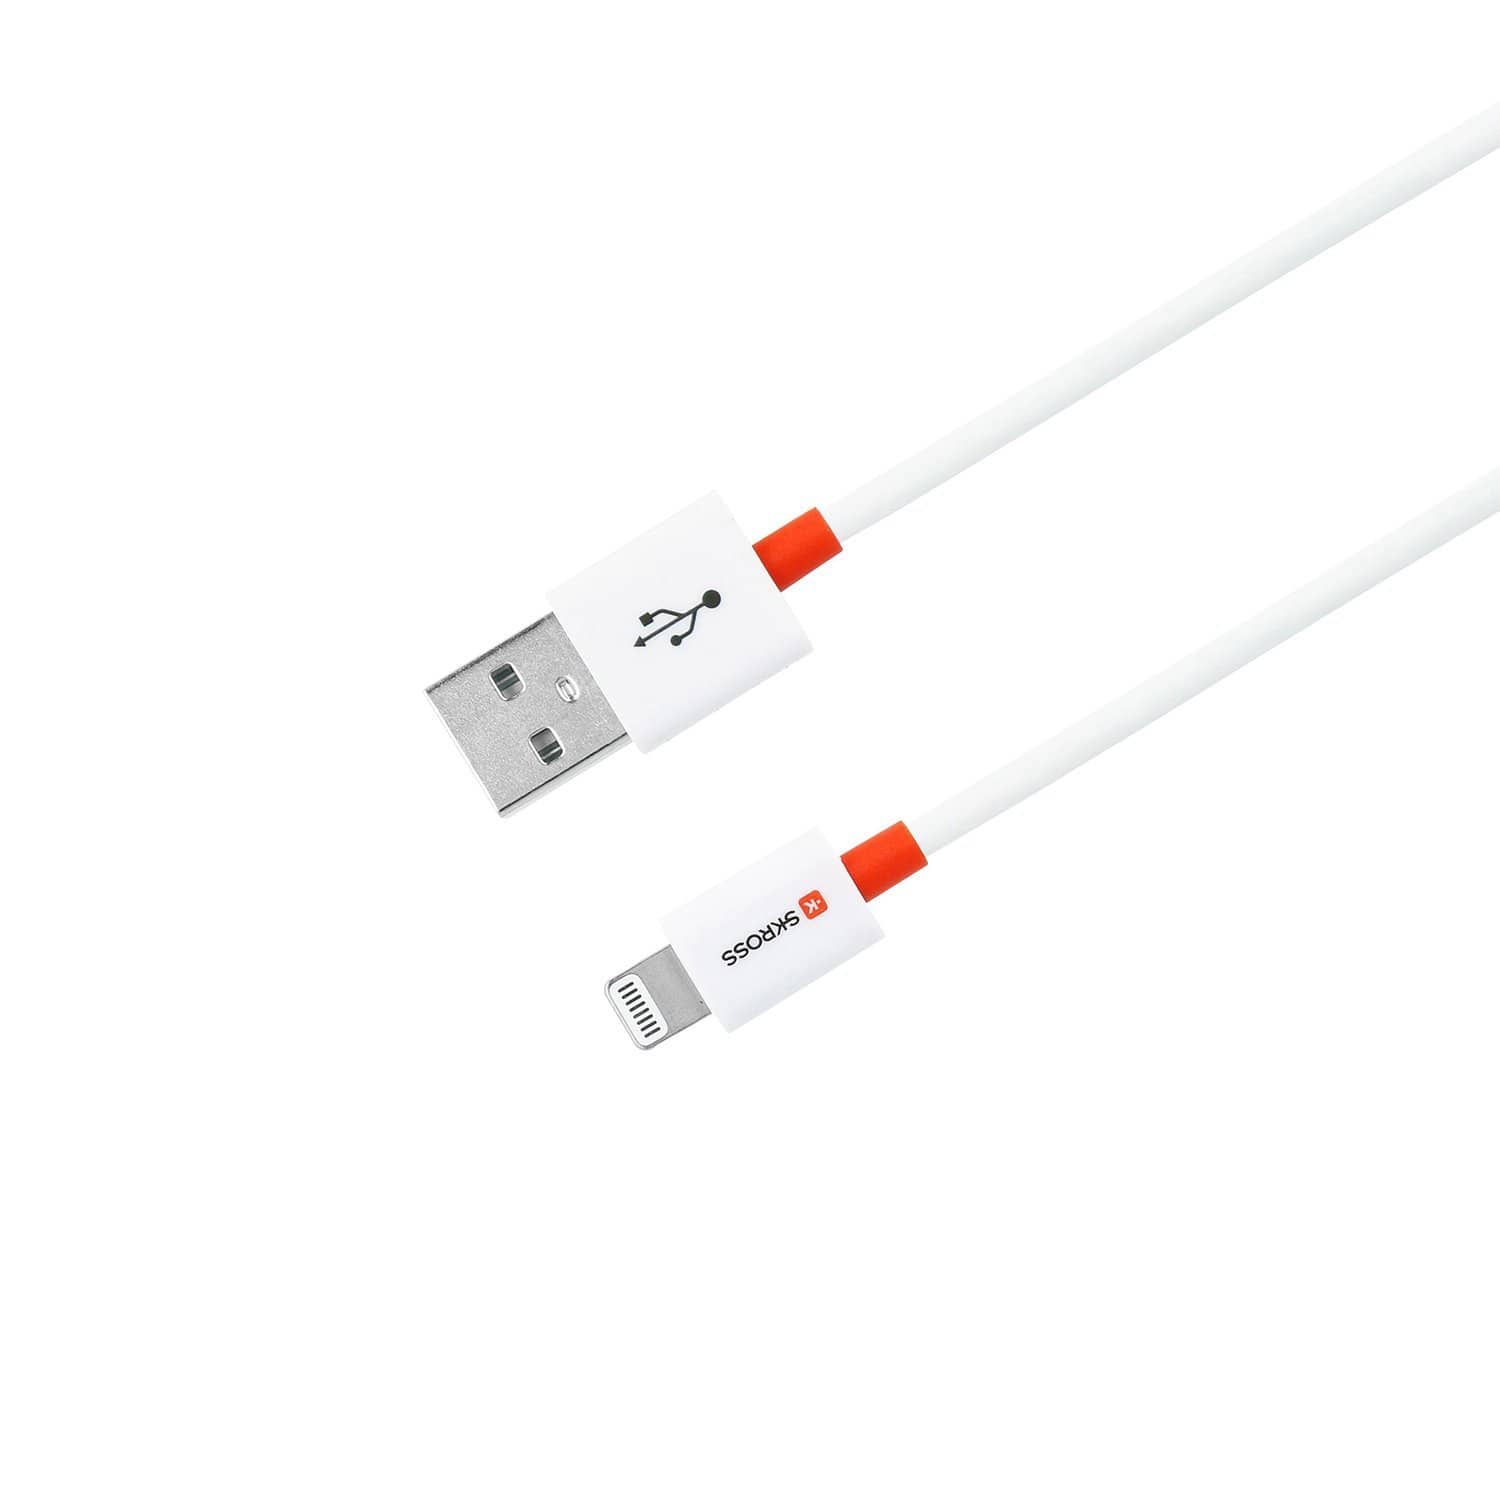 Skross Essentials Charge N Sync Lightning Connector Cable - White - 2700205E - Jashanmal Home